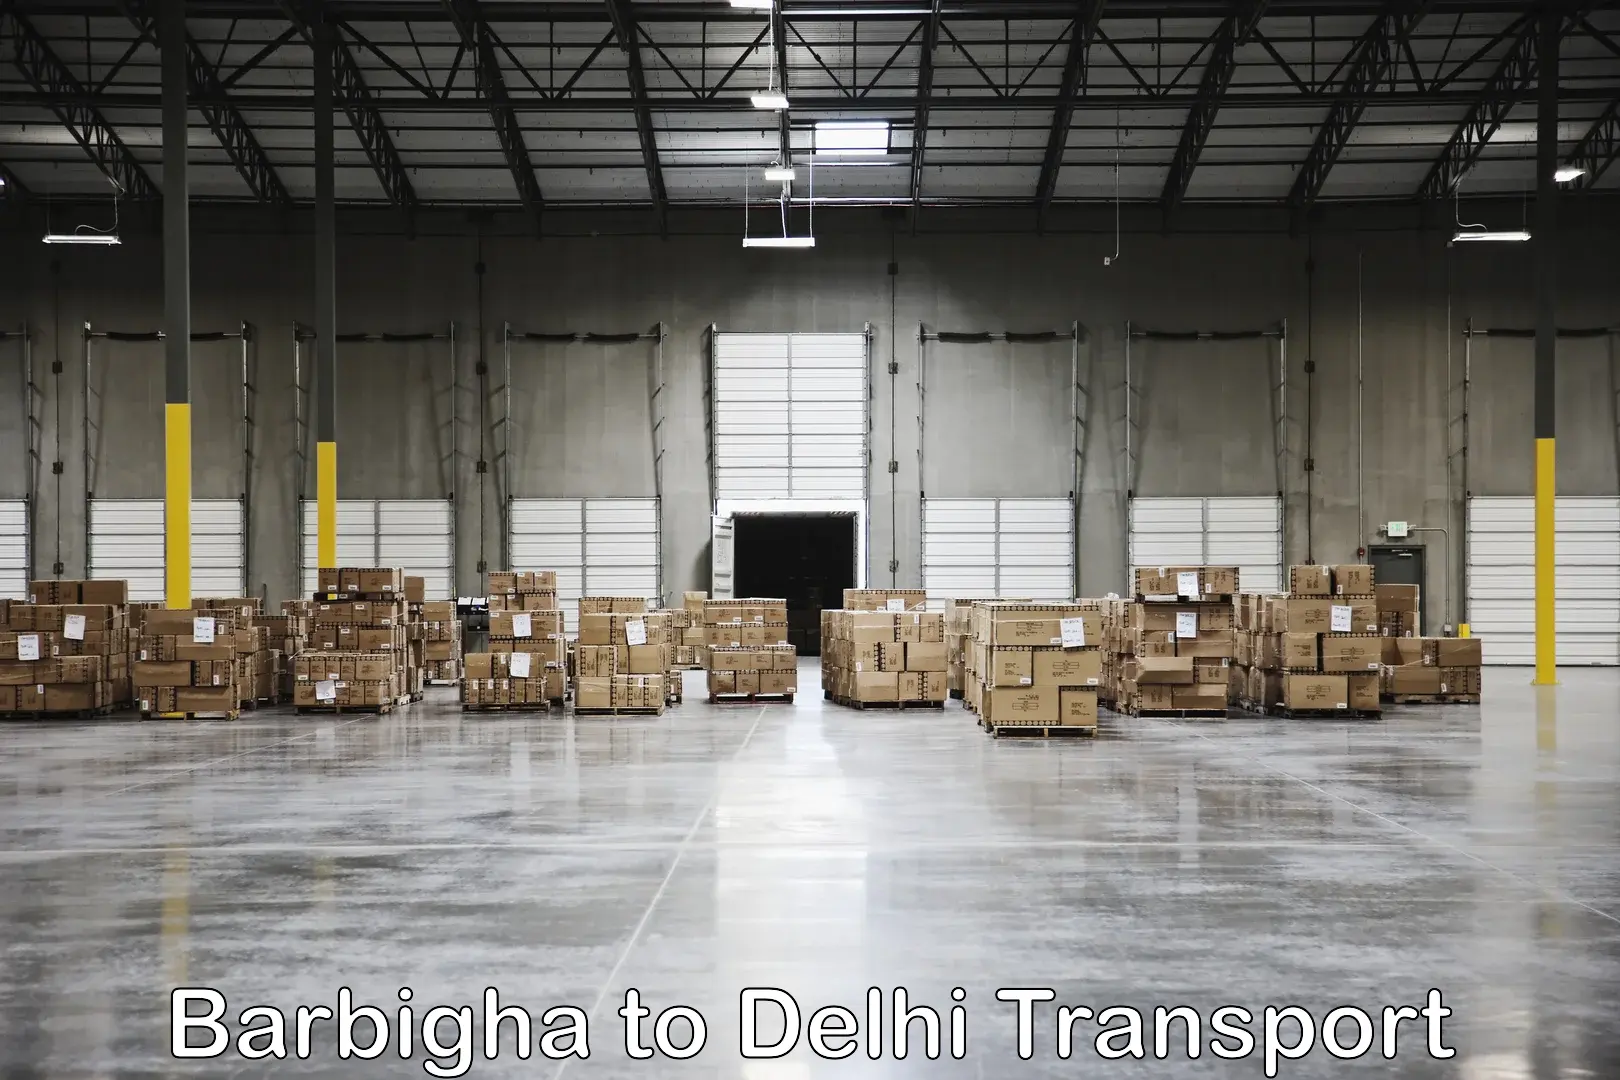 Truck transport companies in India Barbigha to NCR